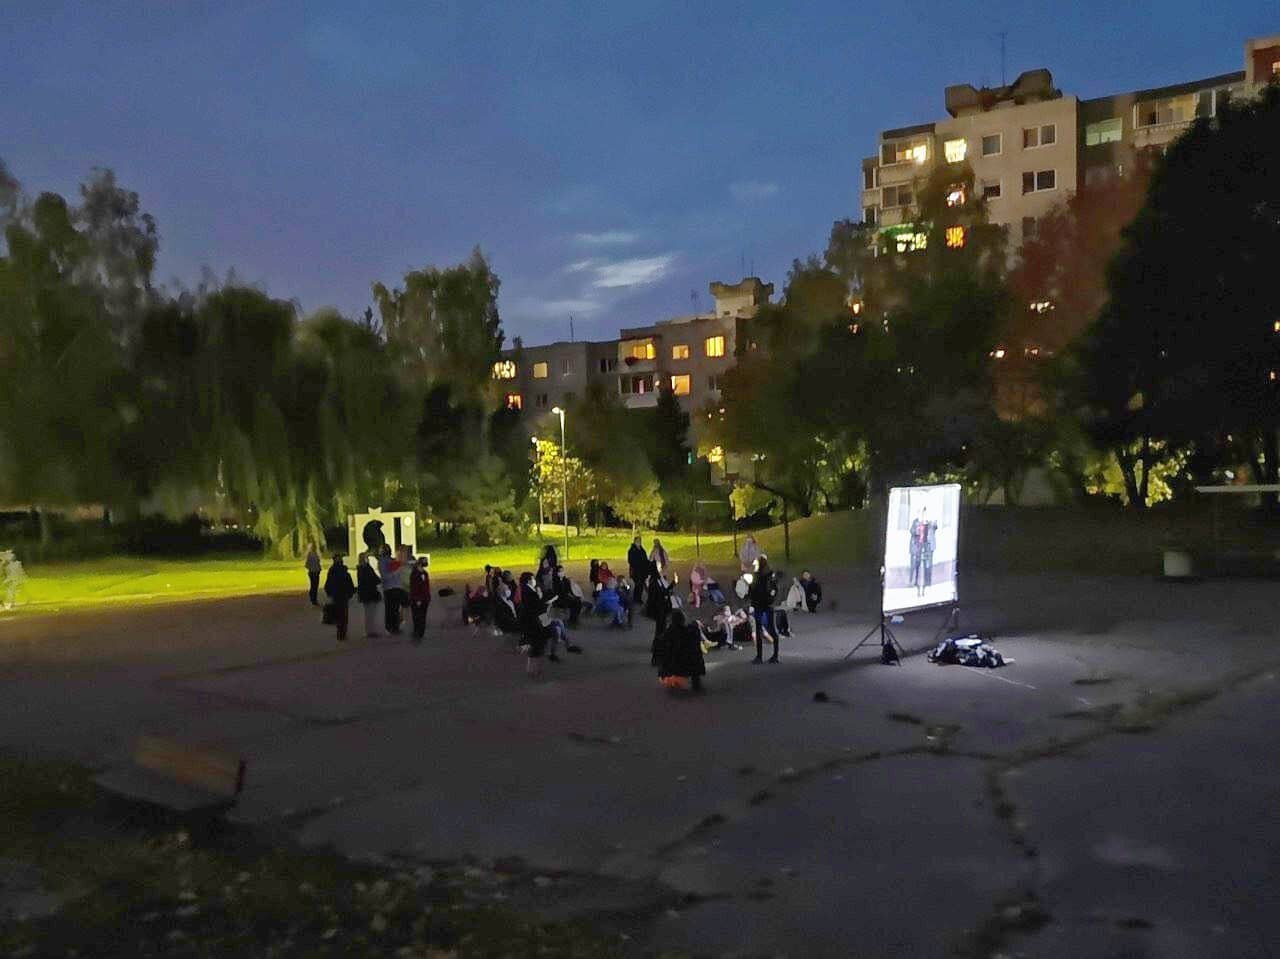 With social distancing measures and Covid restrictions on gatherings in place it feels doubly special and important to show work and be visible in public spaces. 

This is a picture of last  nights screening of Wavelength Europe in a square in Silain